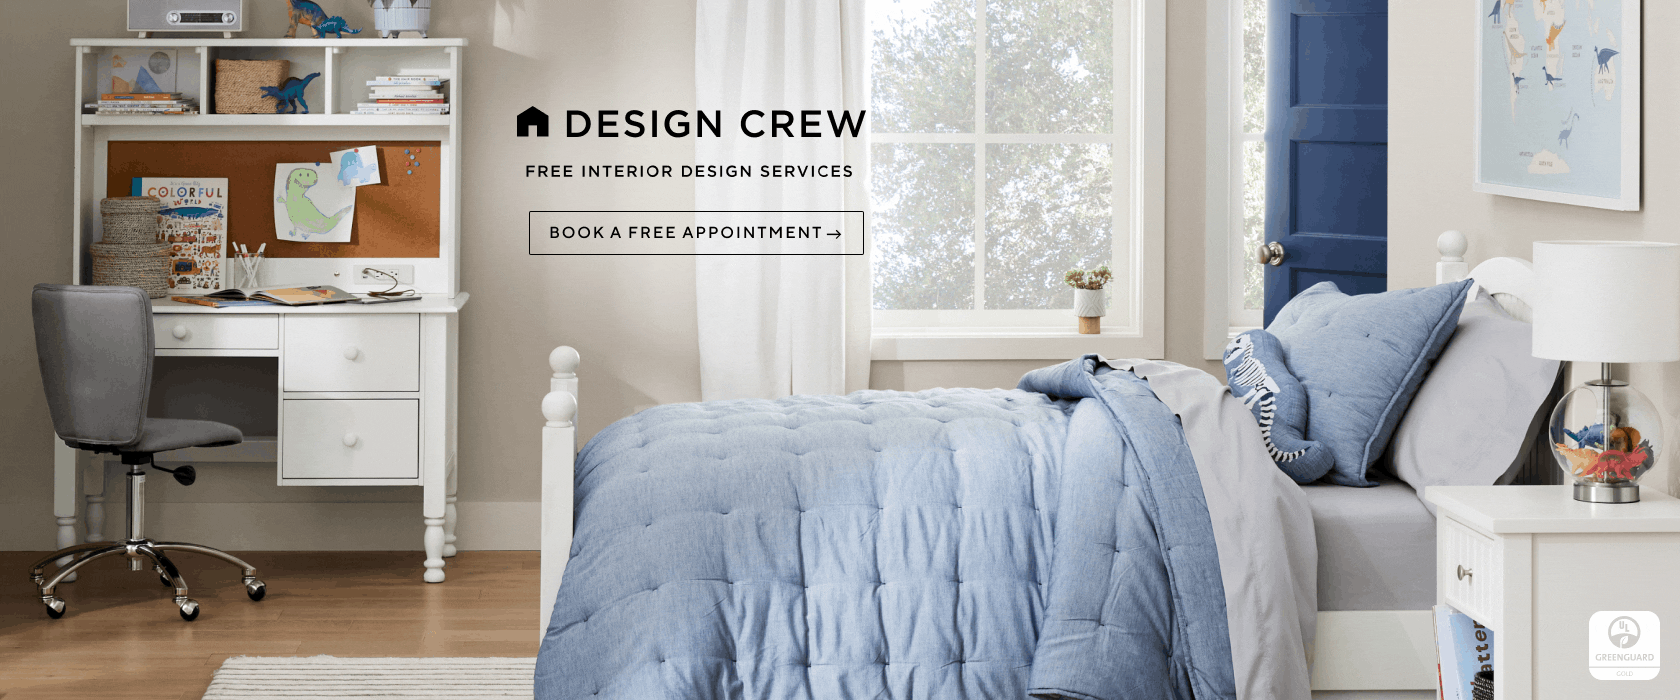 Decorate with Artists & Icons | We collaborate with artists, designers and movie icons to create exclusive collections kids love. | Paw Patrol Bed Linen, Disney Star Wars Baby Bed Linen, Where the Wild Things Are Baby Bed Linen, Tracy Reese's Bed Linen, Disney Bambi Baby Bed Linen | See More Collaborations